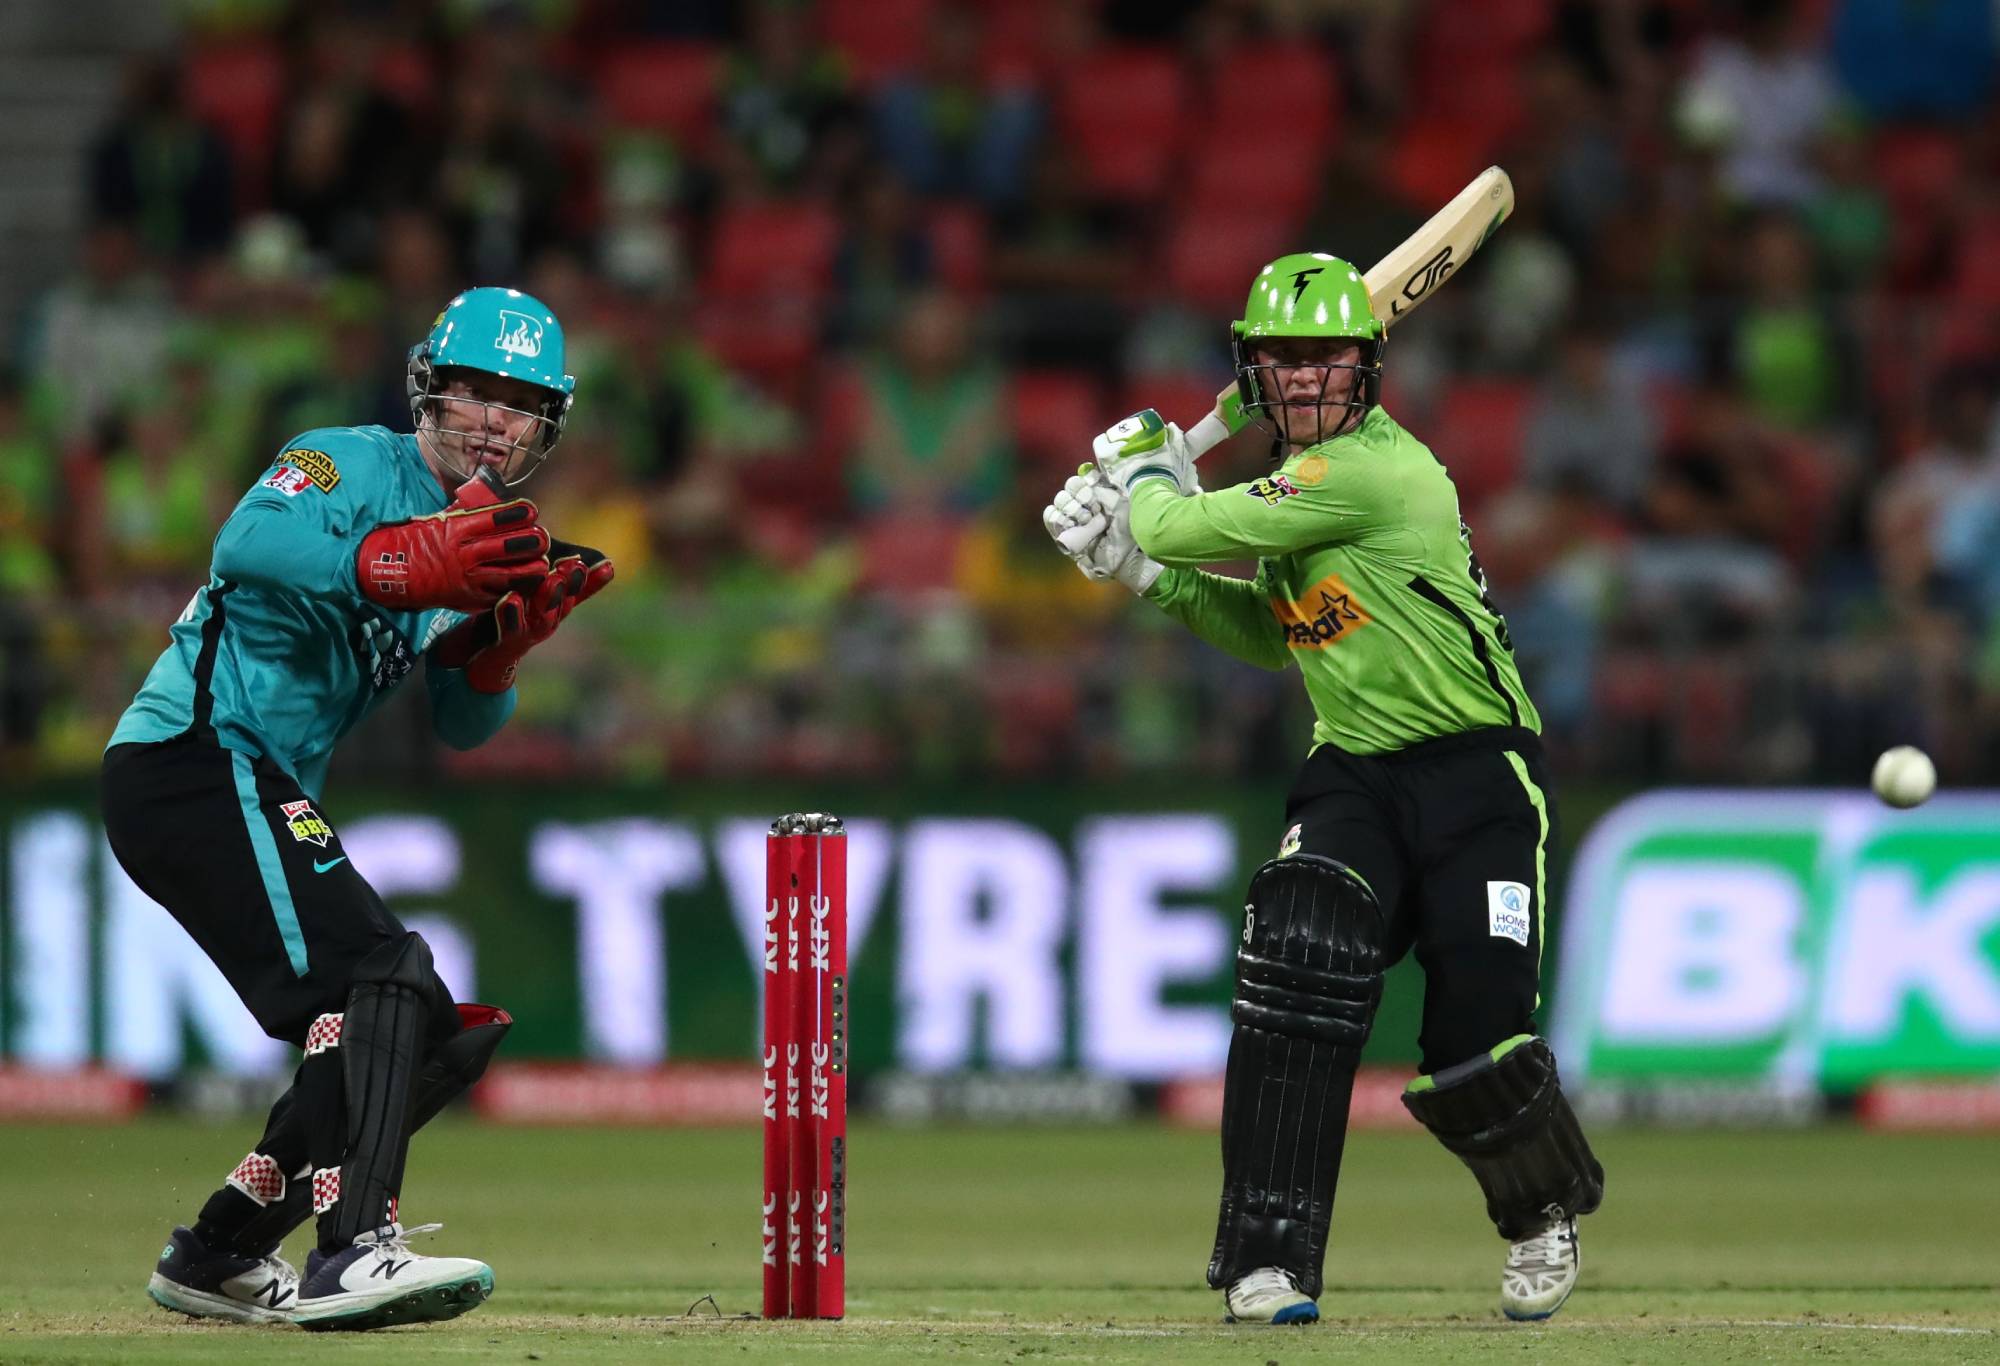 SYDNEY, AUSTRALIA - DECEMBER 27: Matthew Gilkes of the Thunder bats during the Men's Big Bash League match between the Sydney Thunder and the Brisbane Heat at Sydney Showground Stadium on December 27, 2022 in Sydney, Australia. (Photo by Jason McCawley/Getty Images)